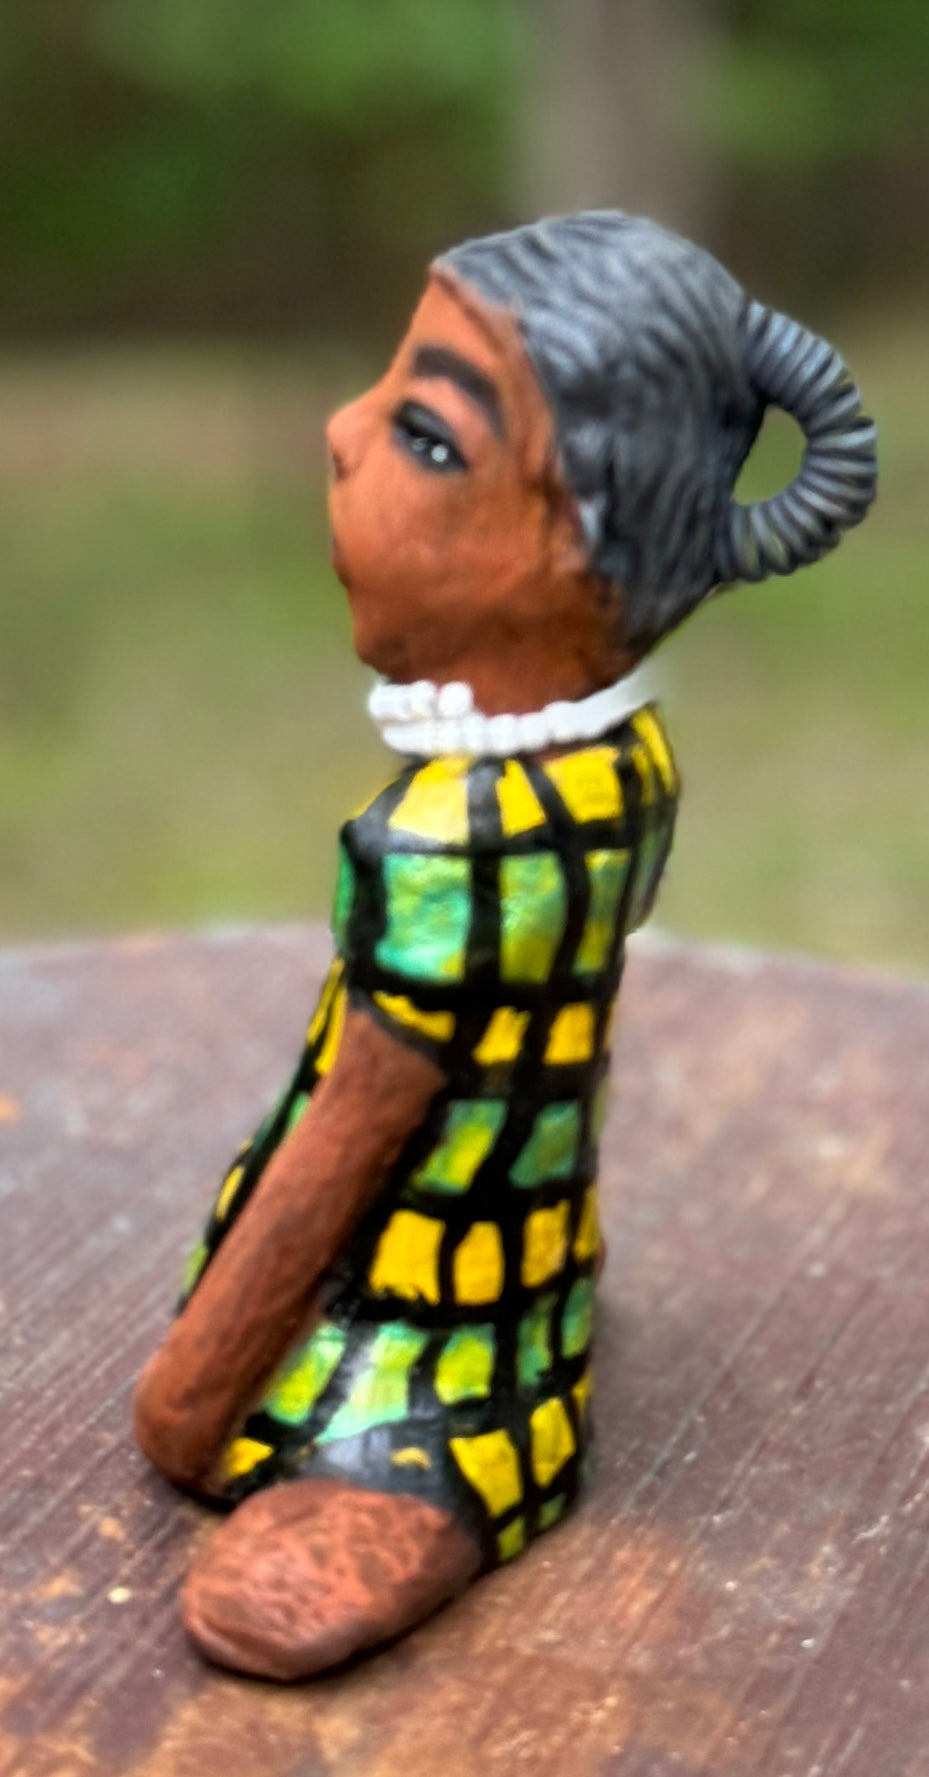 <p>Experience the bold and fearless Efia from the Herdew Collection! This raku fired sculpture stands tall at 6" x 4" x 3" and weighs a brave 10.44 ozs. Clothed in a striking yellow and green dress, Efia's coiled wire hair stretches over 1 foot. With confident outstretched arms, she strikes a yoga pose. Begin your collection with the captivating Efia and embrace adventure!</p> <p>&nbsp;</p>